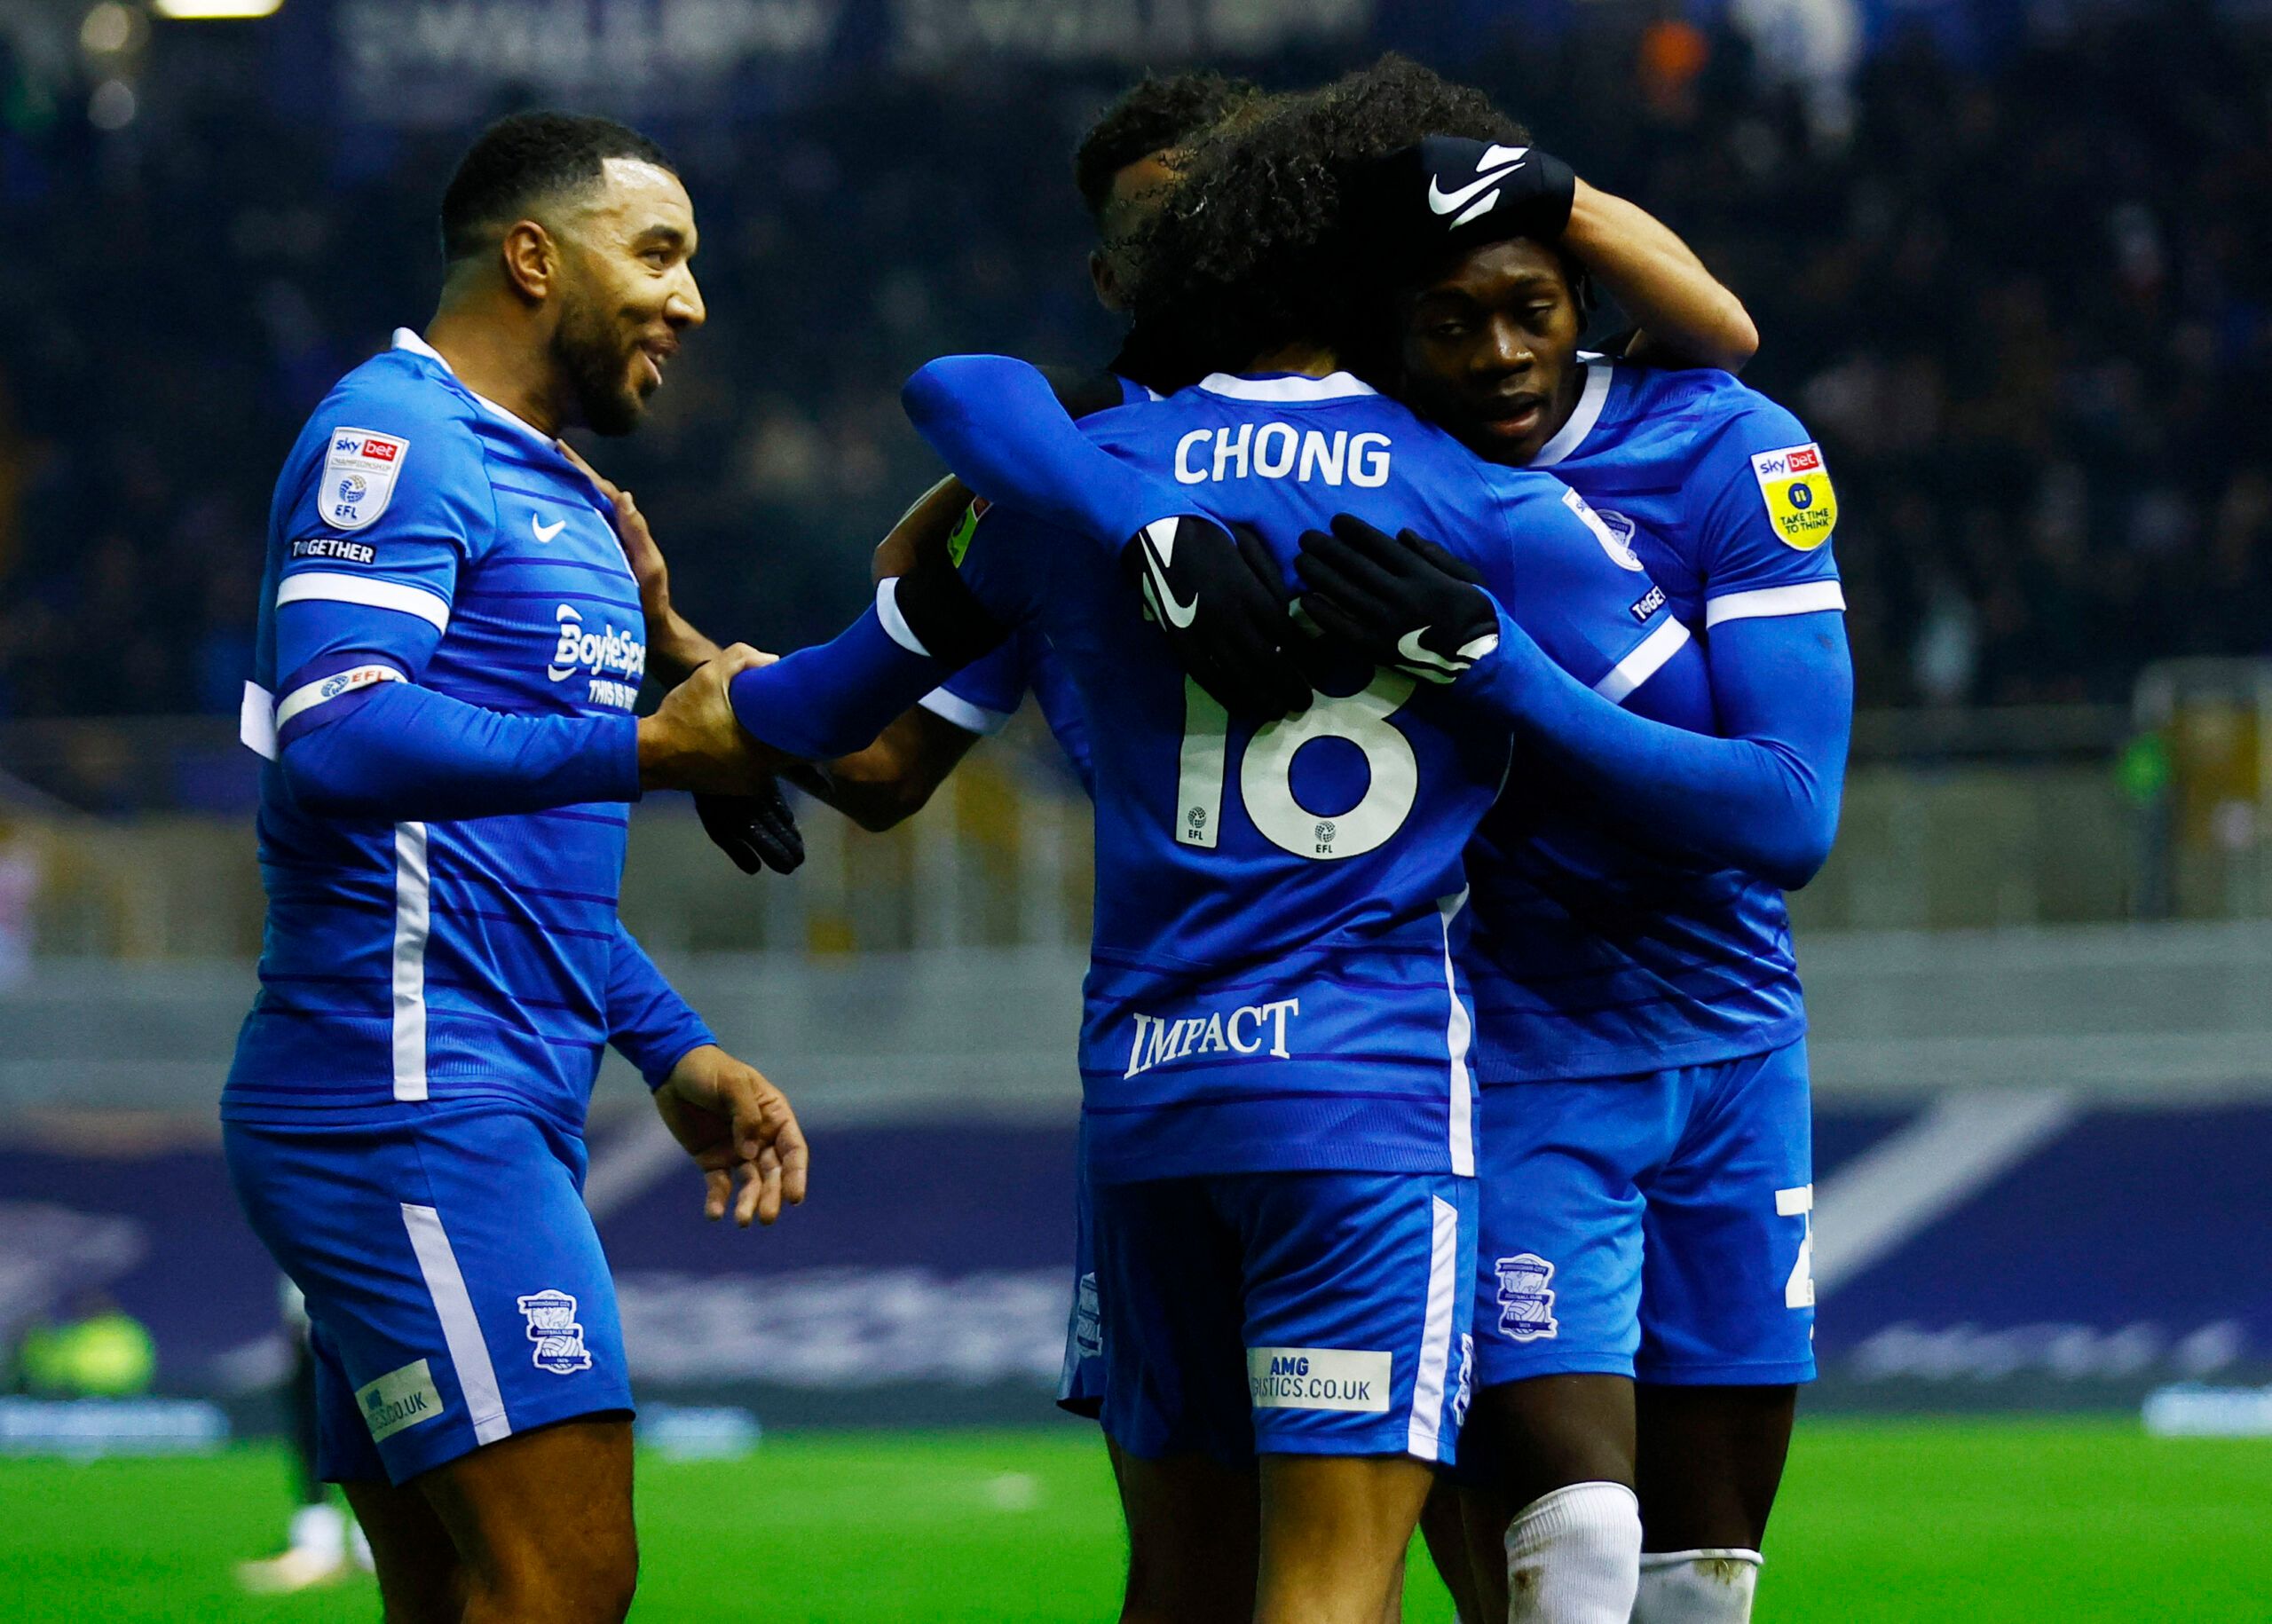 Soccer Football - Championship - Birmingham City v Reading - St Andrews, Birmingham, Britain - December 16, 2022 Birmingham City's Tahith Chong celebrates scoring their third goal with teammates Action Images/Andrew Boyers EDITORIAL USE ONLY. No use with unauthorized audio, video, data, fixture lists, club/league logos or 'live' services. Online in-match use limited to 75 images, no video emulation. No use in betting, games or single club /league/player publications.  Please contact your account